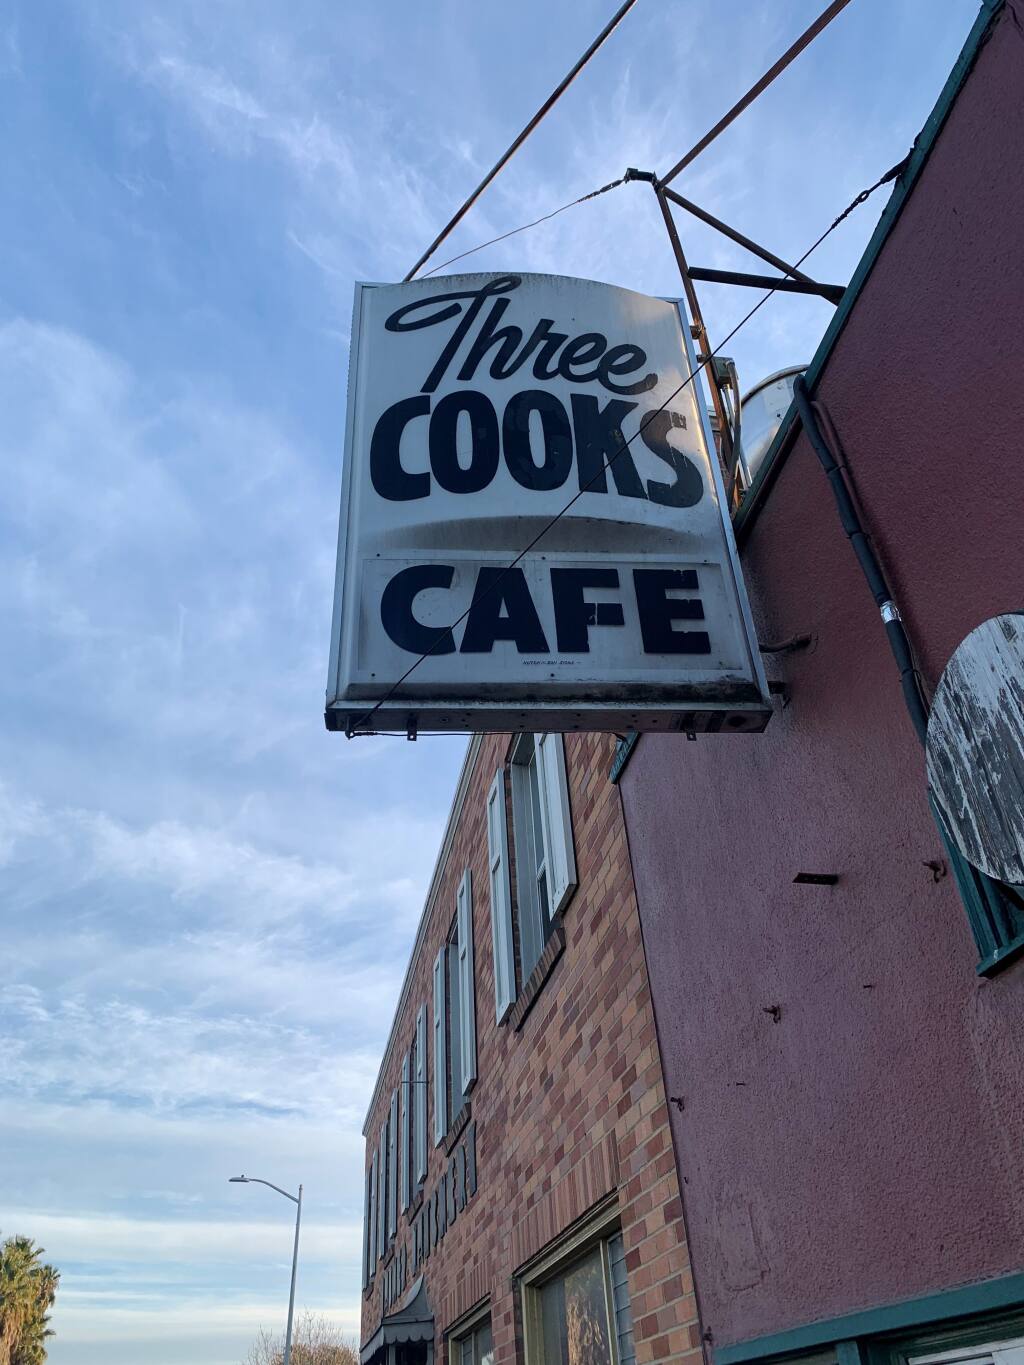 Another restaurant now operates where the Three Cooks Cafe once offered old-fashioned burgers and steaks, but the sign remains for all to see and remember. (DAVID TEMPLETON/ARGUS-COURIER STAFF)